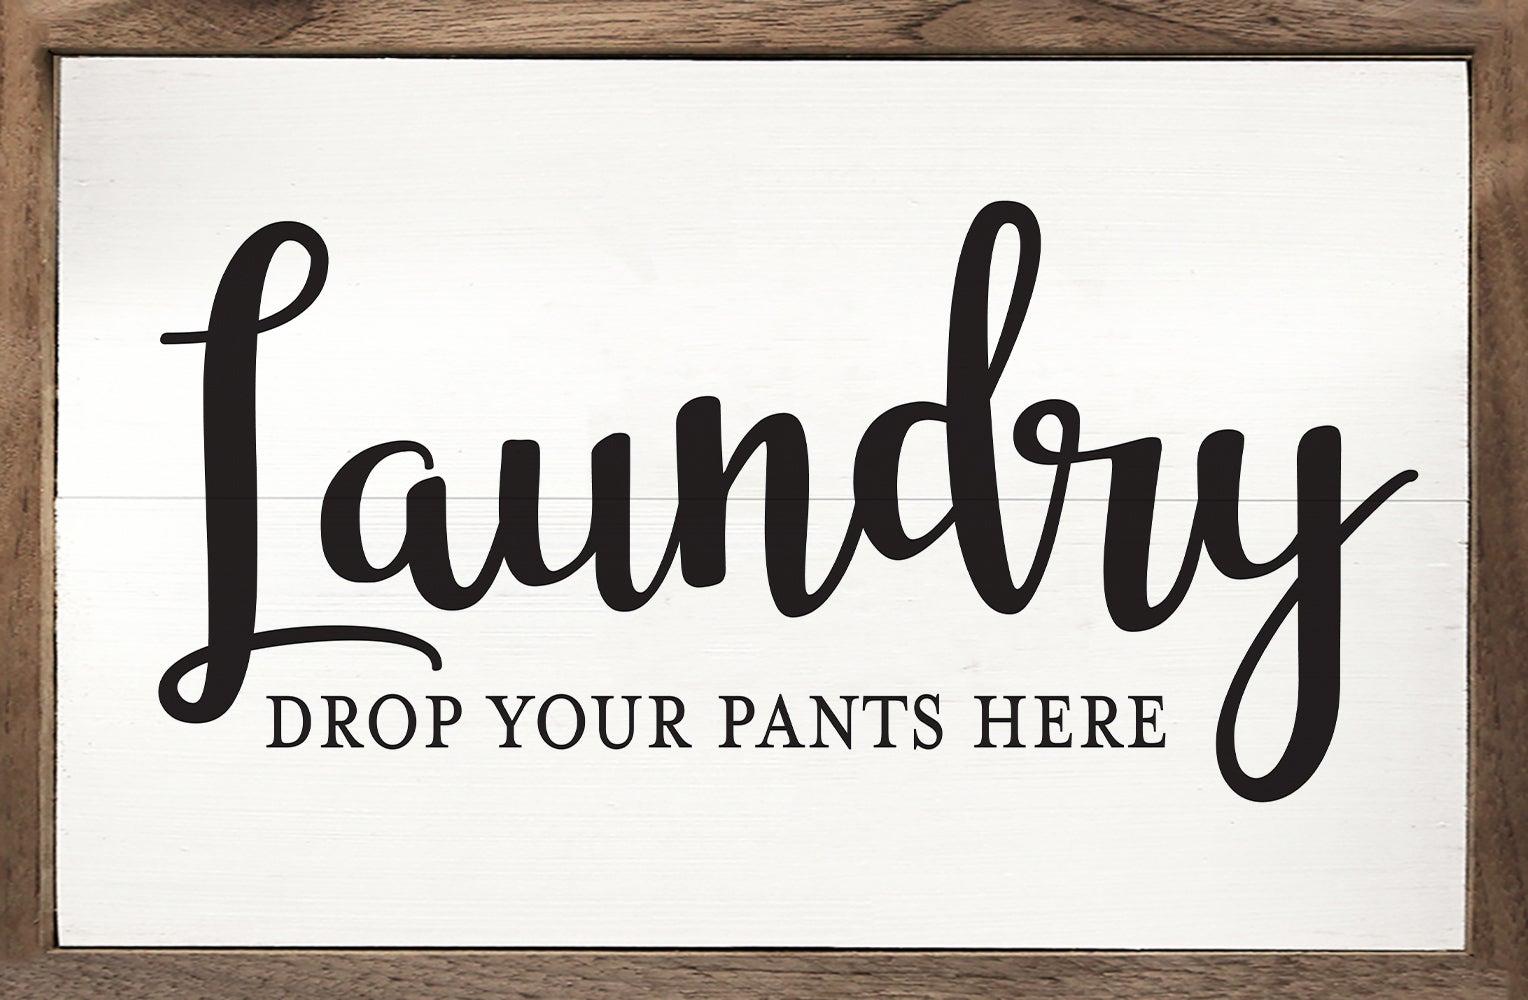 At Auction Laundry drop your pants here retro style advertising sign